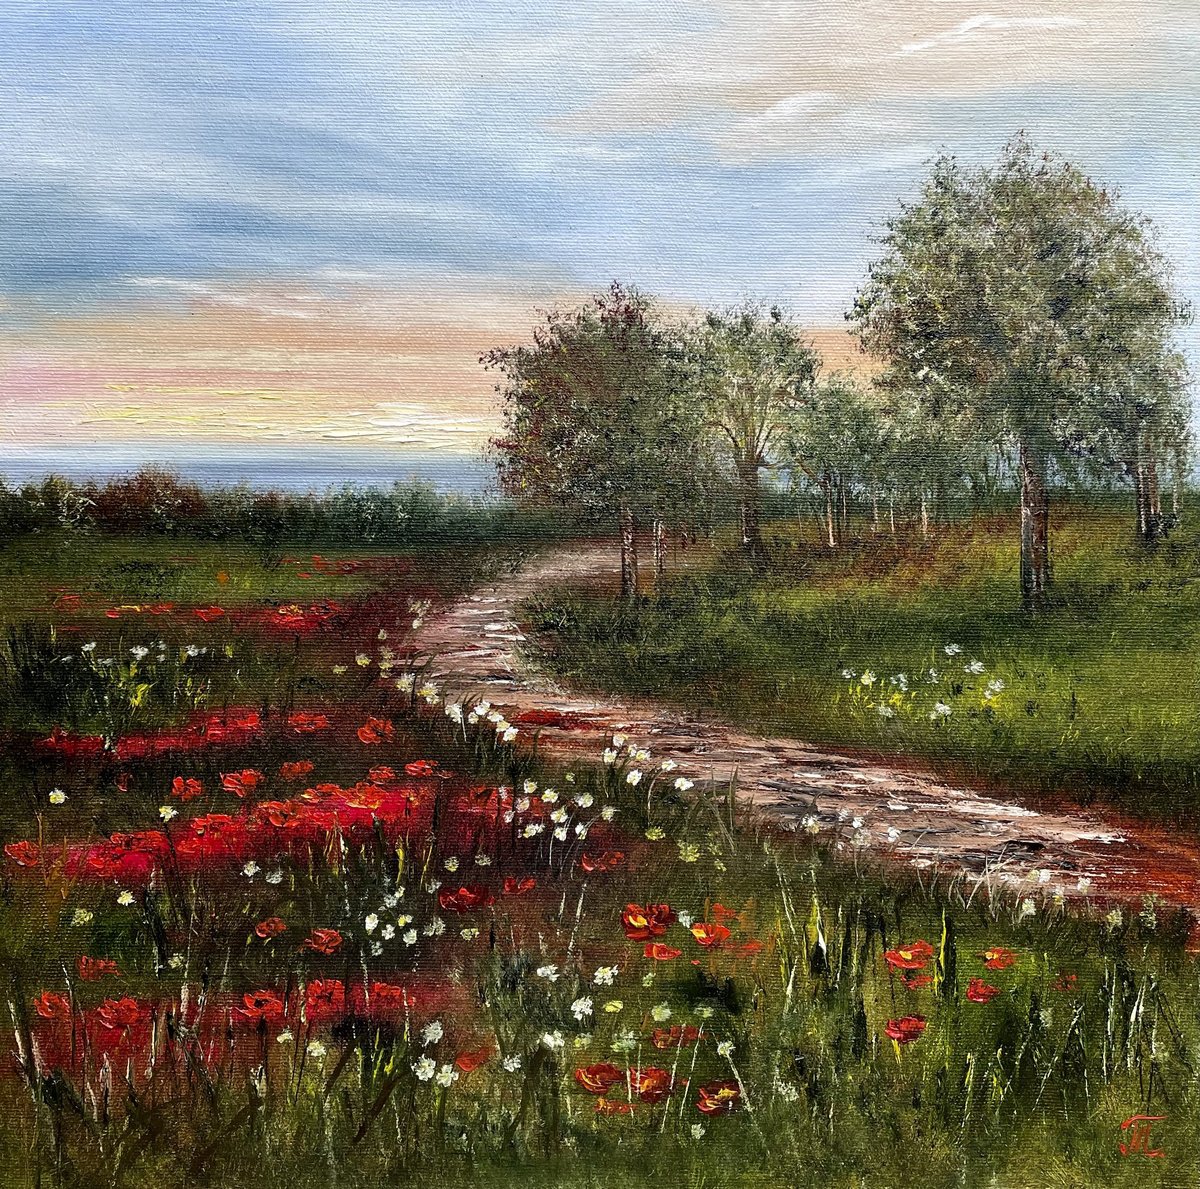 Summer field of poppies by Tanja Frost